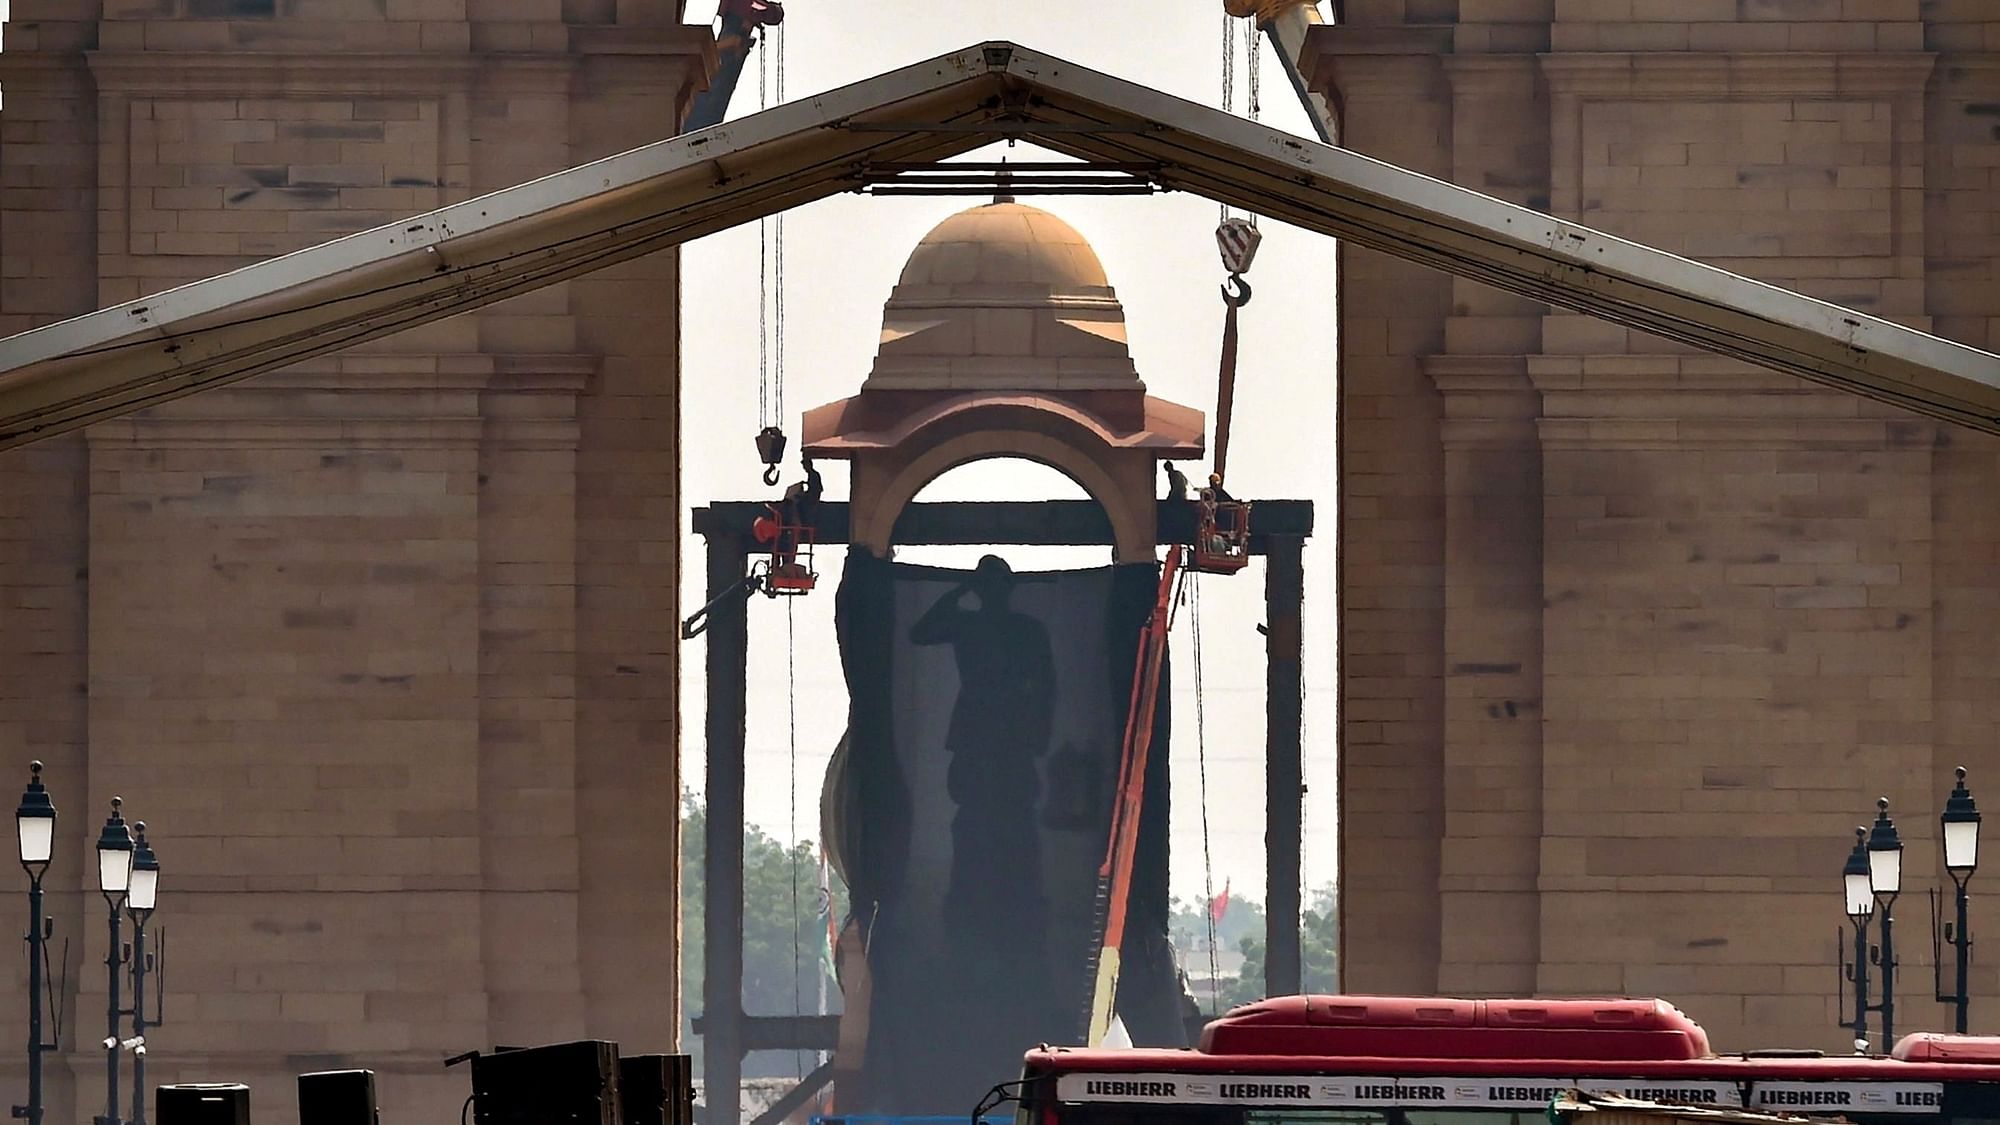 <div class="paragraphs"><p>The PM will also unveil a 28-foot granite statue of Netaji at <a href="https://www.thequint.com/topic/india-gate">India Gate</a>.</p></div>